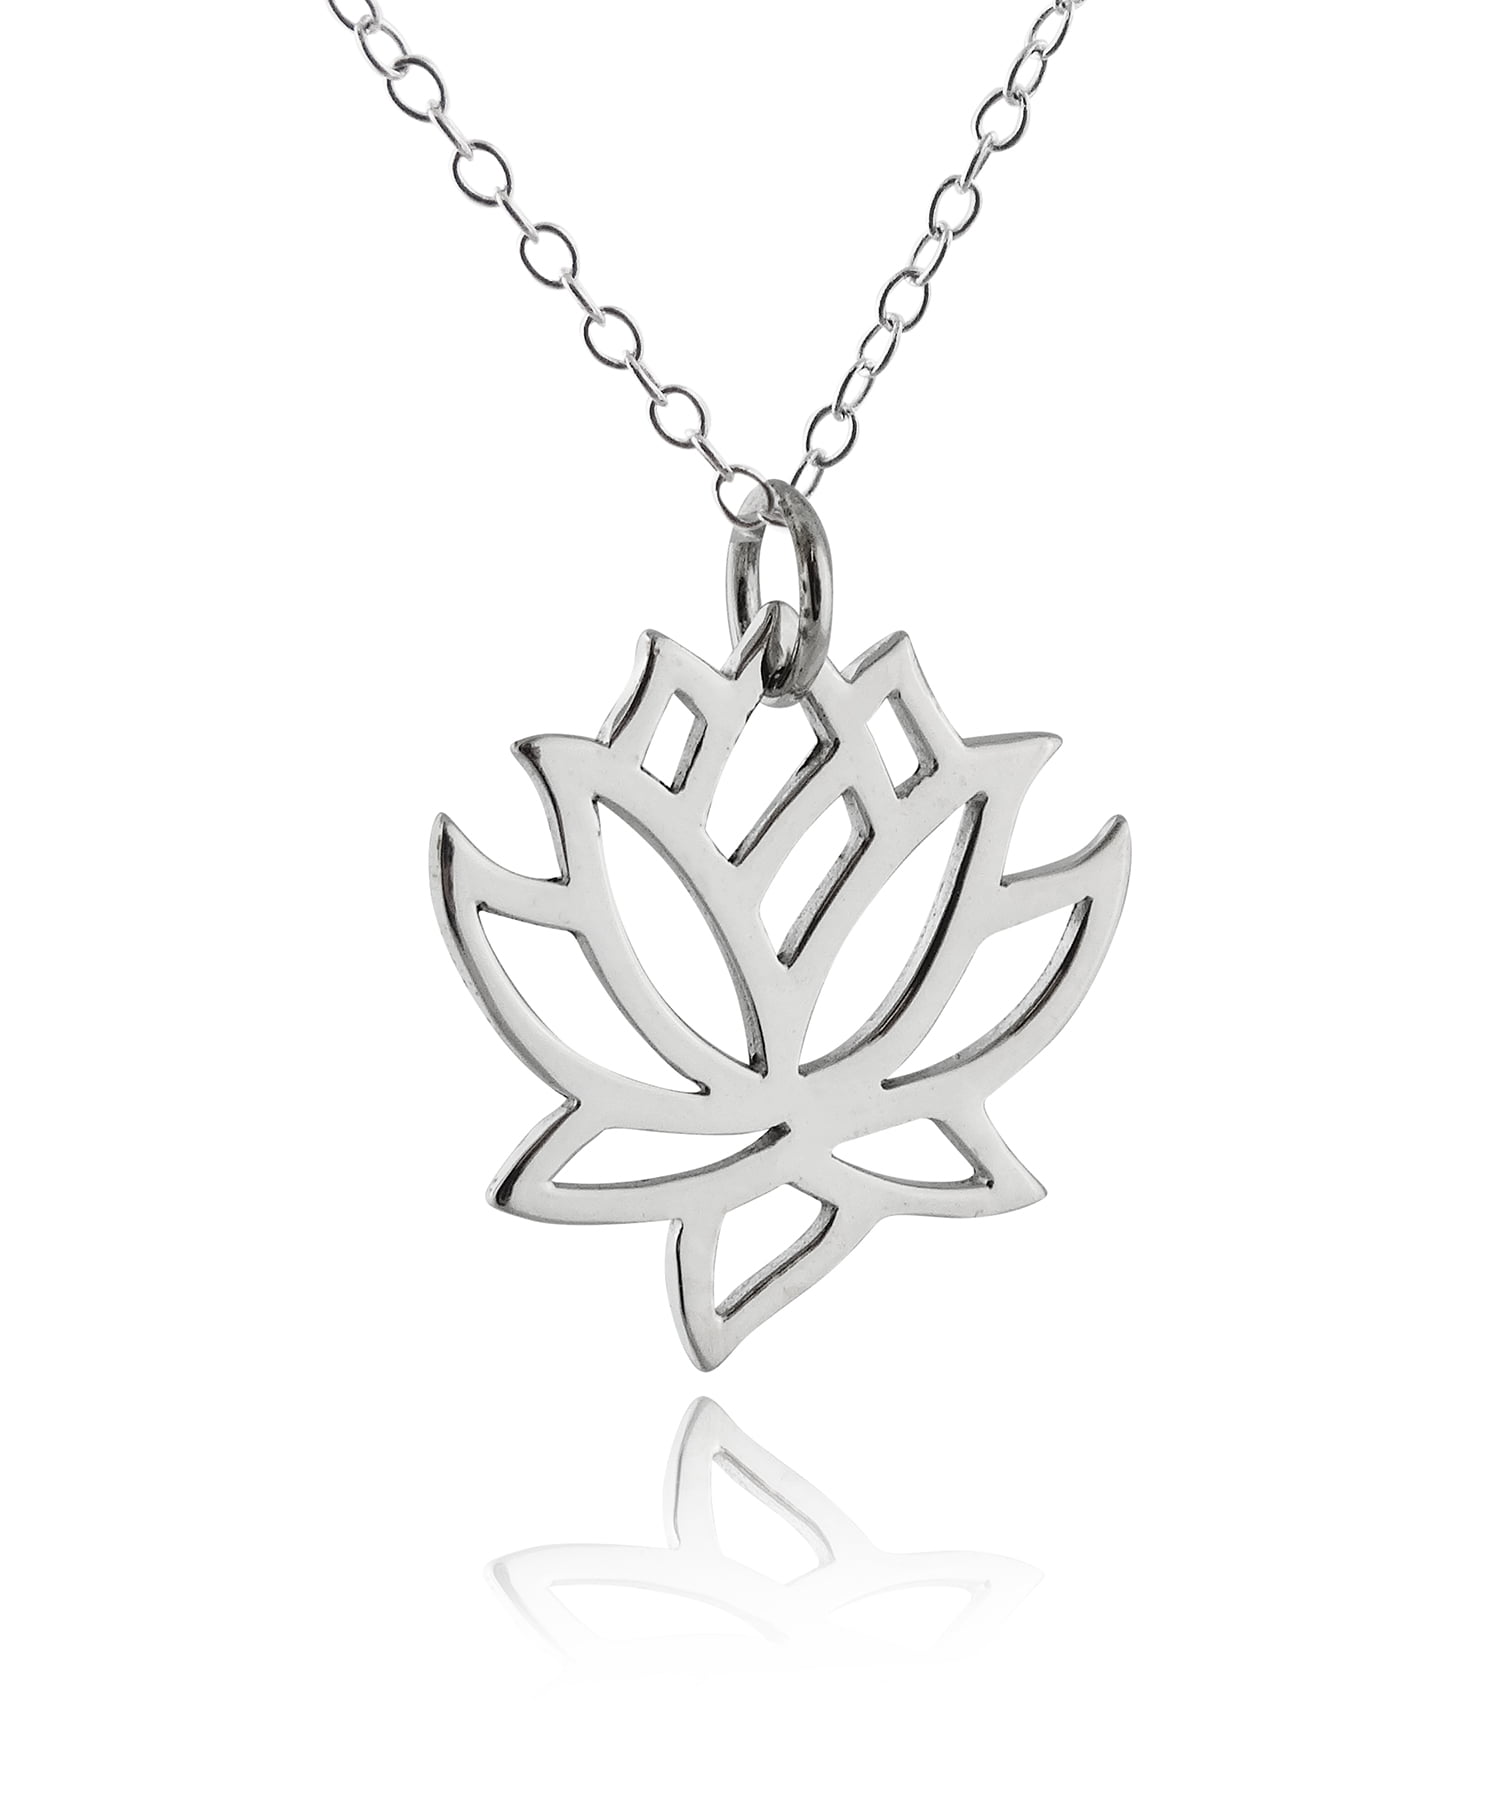 18 Sterling Silver Diamond Accent Lotus Flower Pendant Necklace